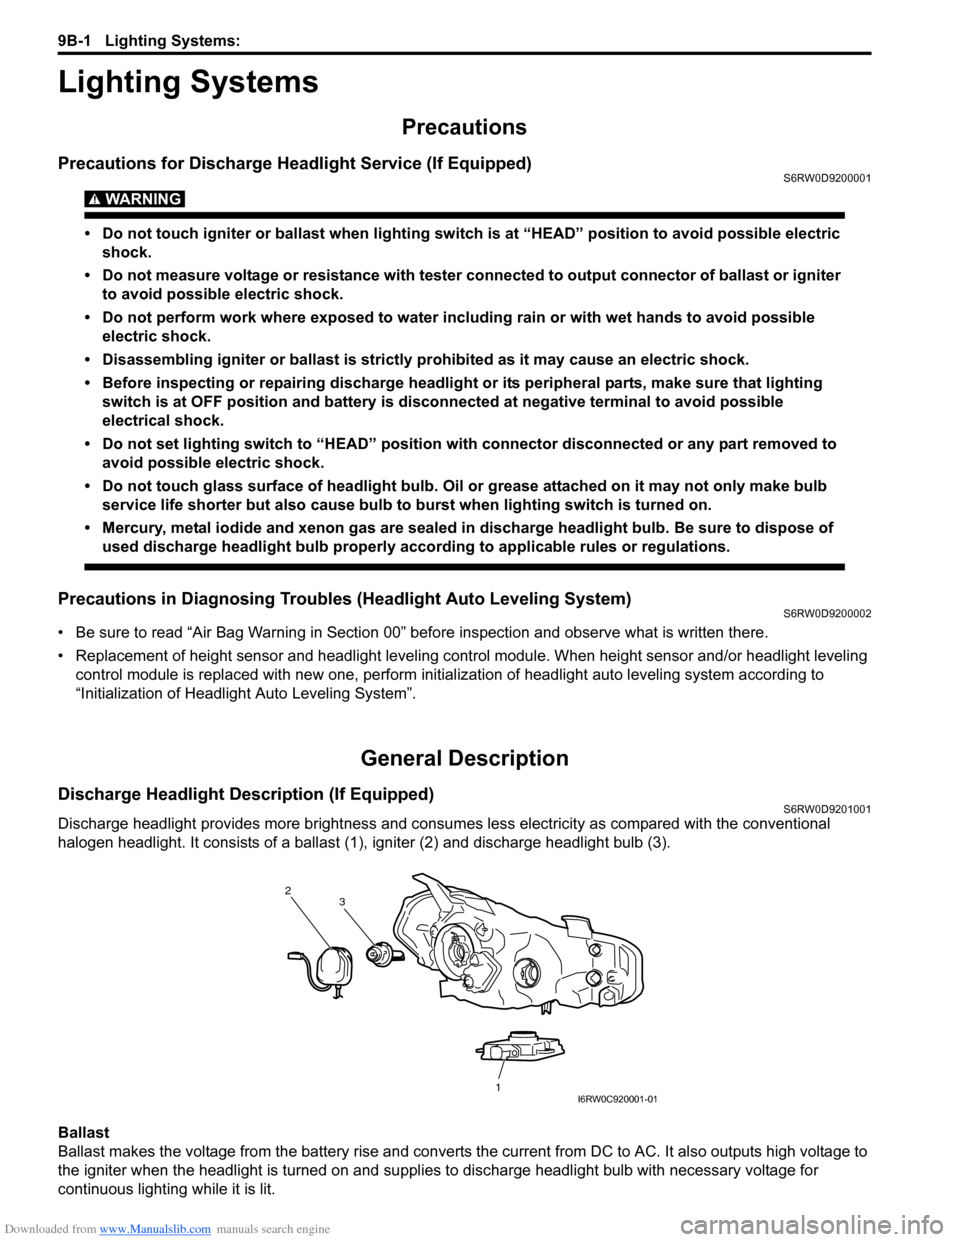 SUZUKI SX4 2006 1.G Service Workshop Manual Downloaded from www.Manualslib.com manuals search engine 9B-1 Lighting Systems: 
Body, Cab and Accessories
Lighting Systems
Precautions
Precautions for Discharge Headlight Service (If Equipped)S6RW0D9